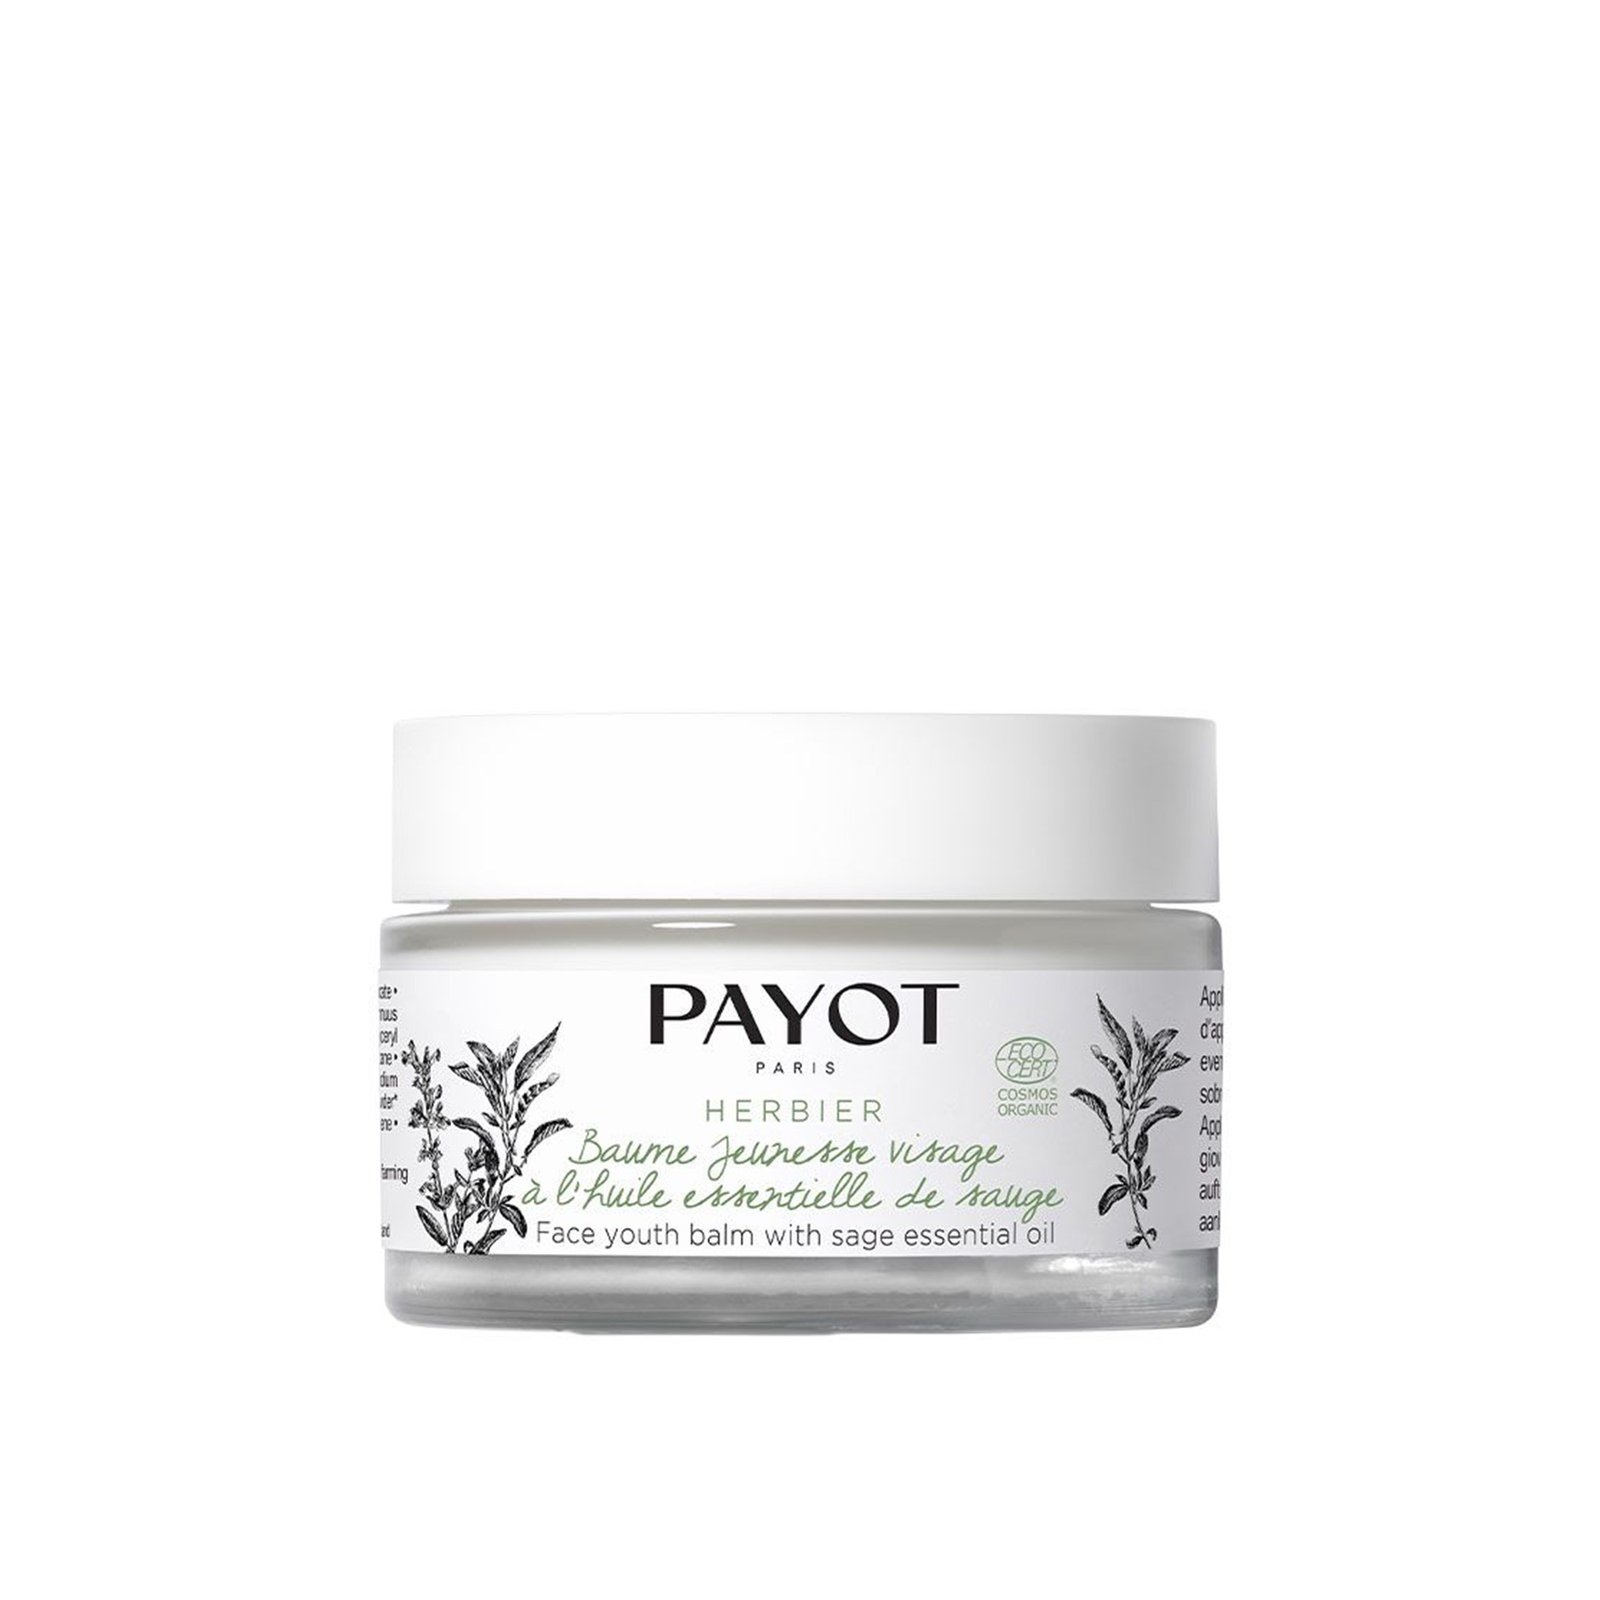 Payot Herbier Face Youth Balm With Sage Essential Oil 50ml (1.6 fl oz)